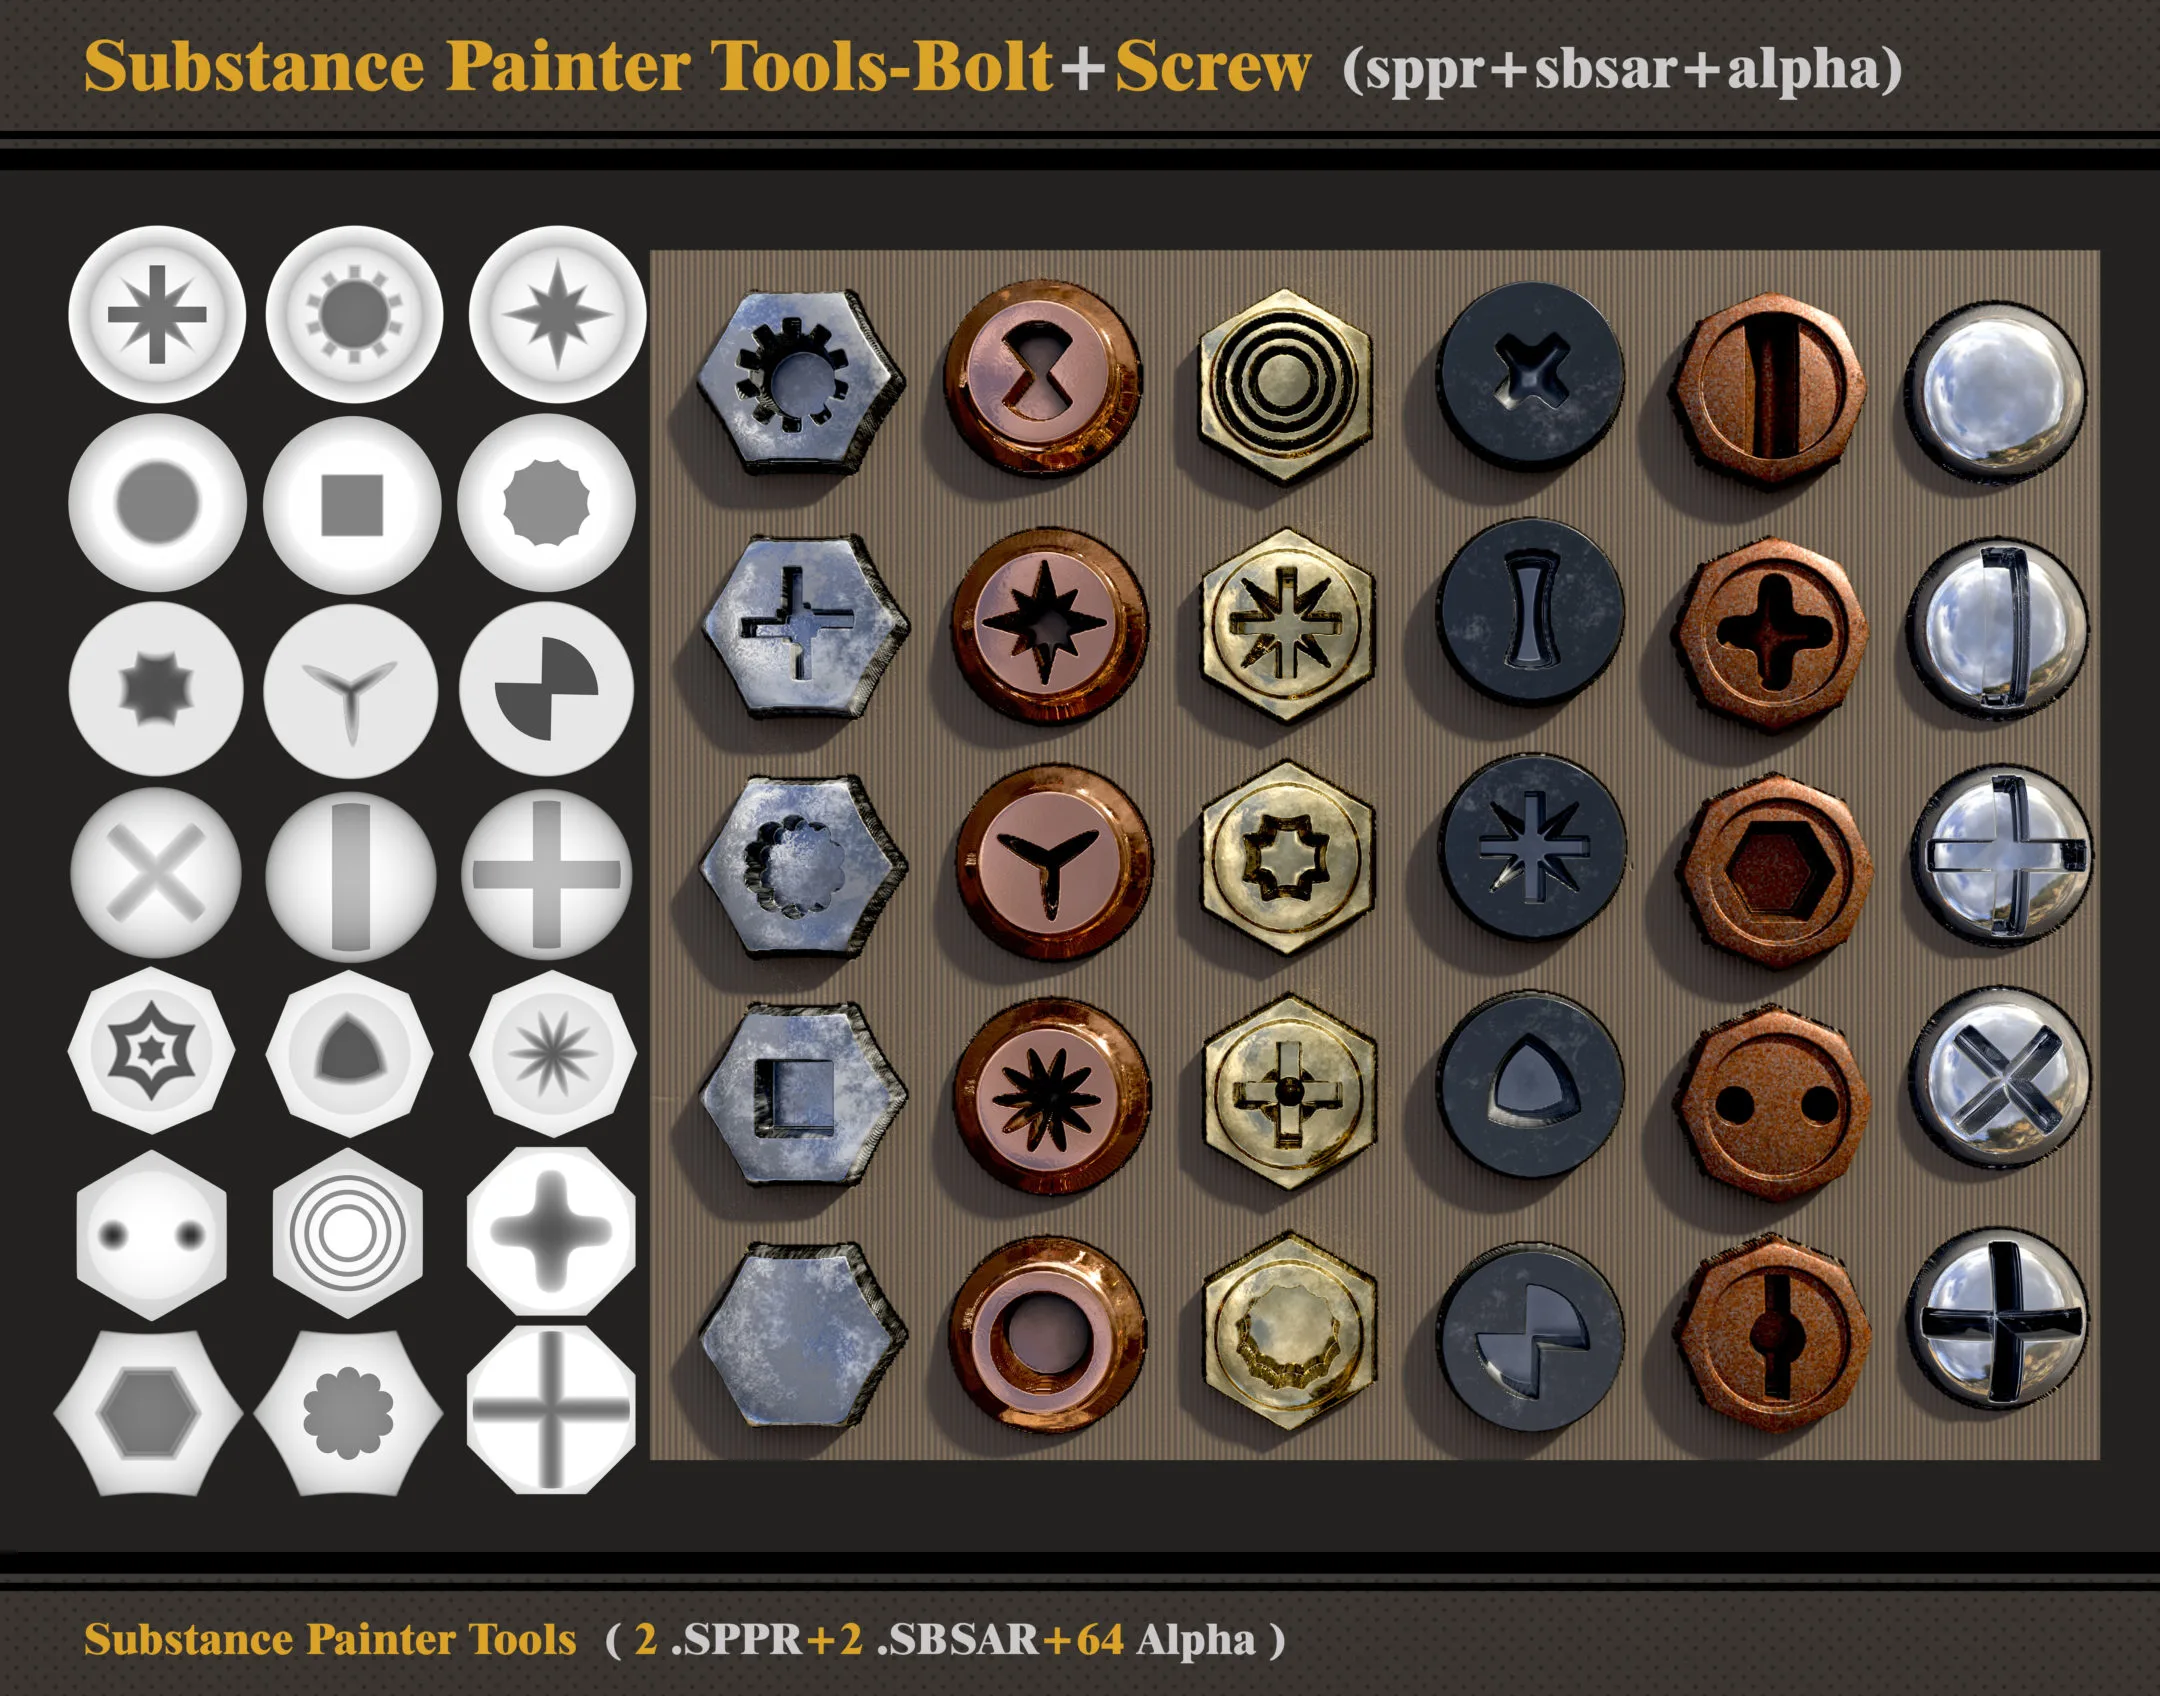 Substance Painter Tools-Bolt and Screw (SPPR-SBSAR-Alpha)